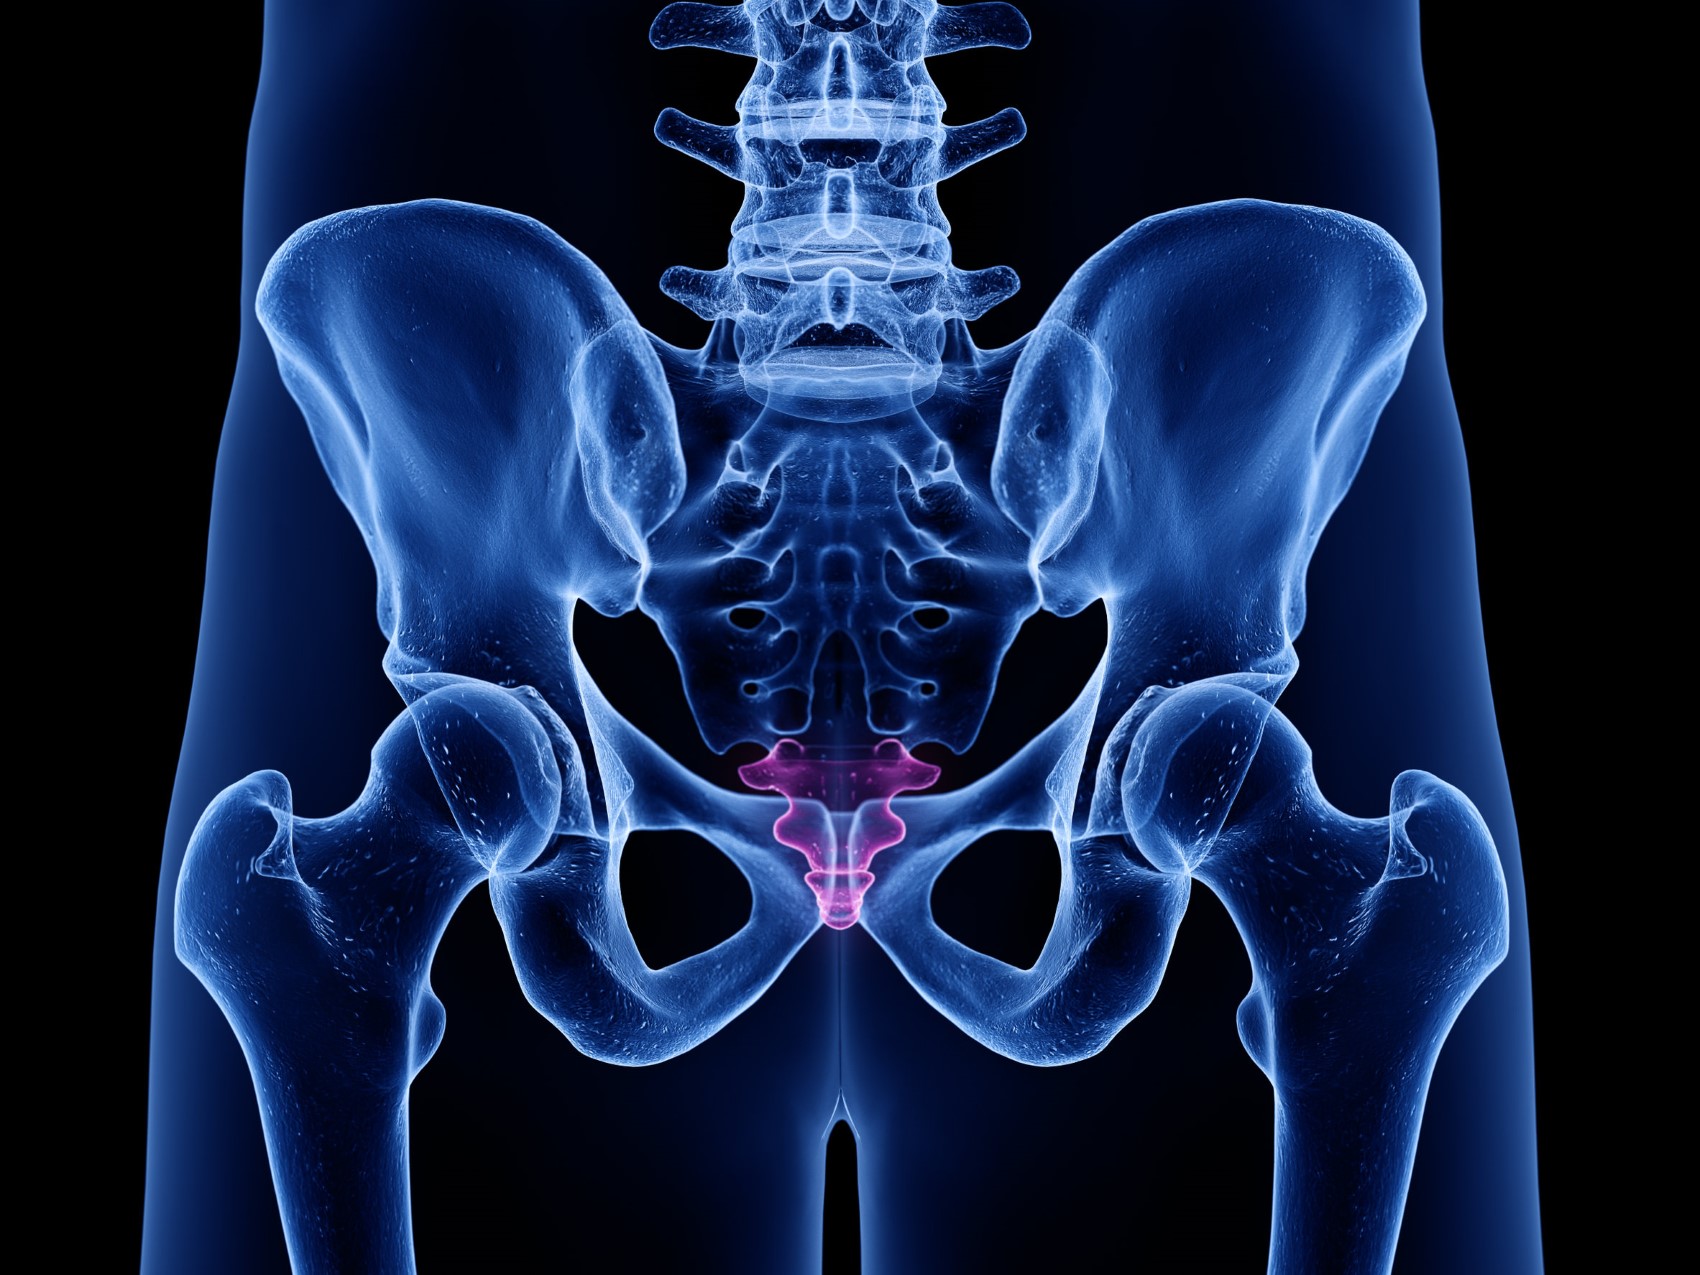 Unraveling The Mystery Of Tailbone Pain: Common Causes And How To